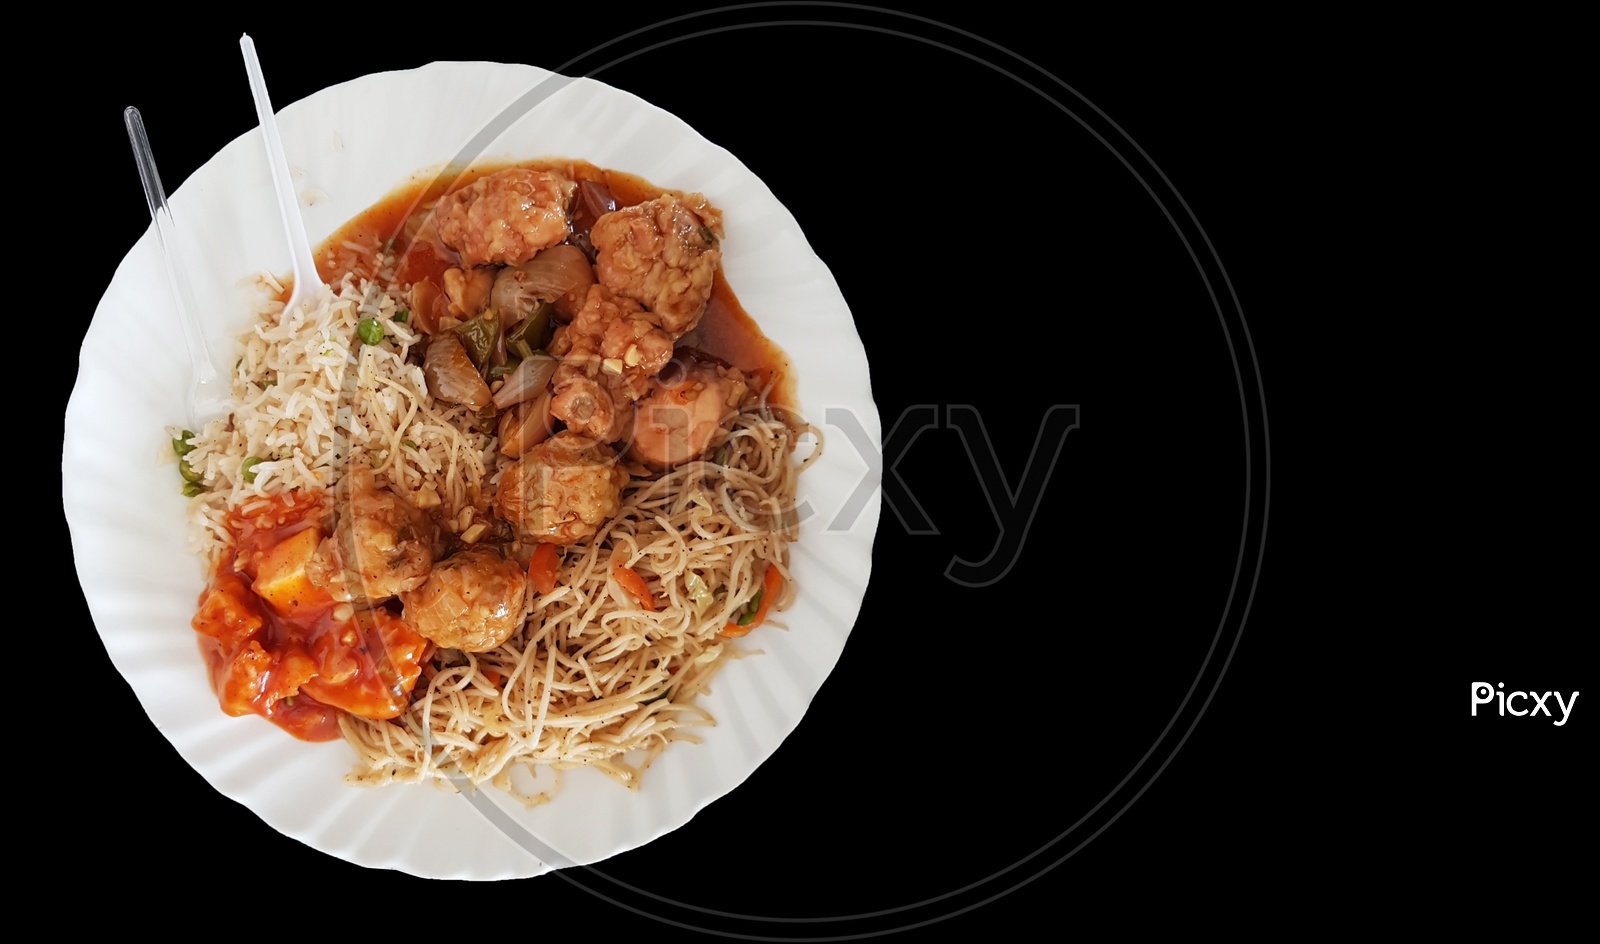 Chinese Food Noodle And Chilli Chicken Gravy On A Plate With Black Background With Space For Text